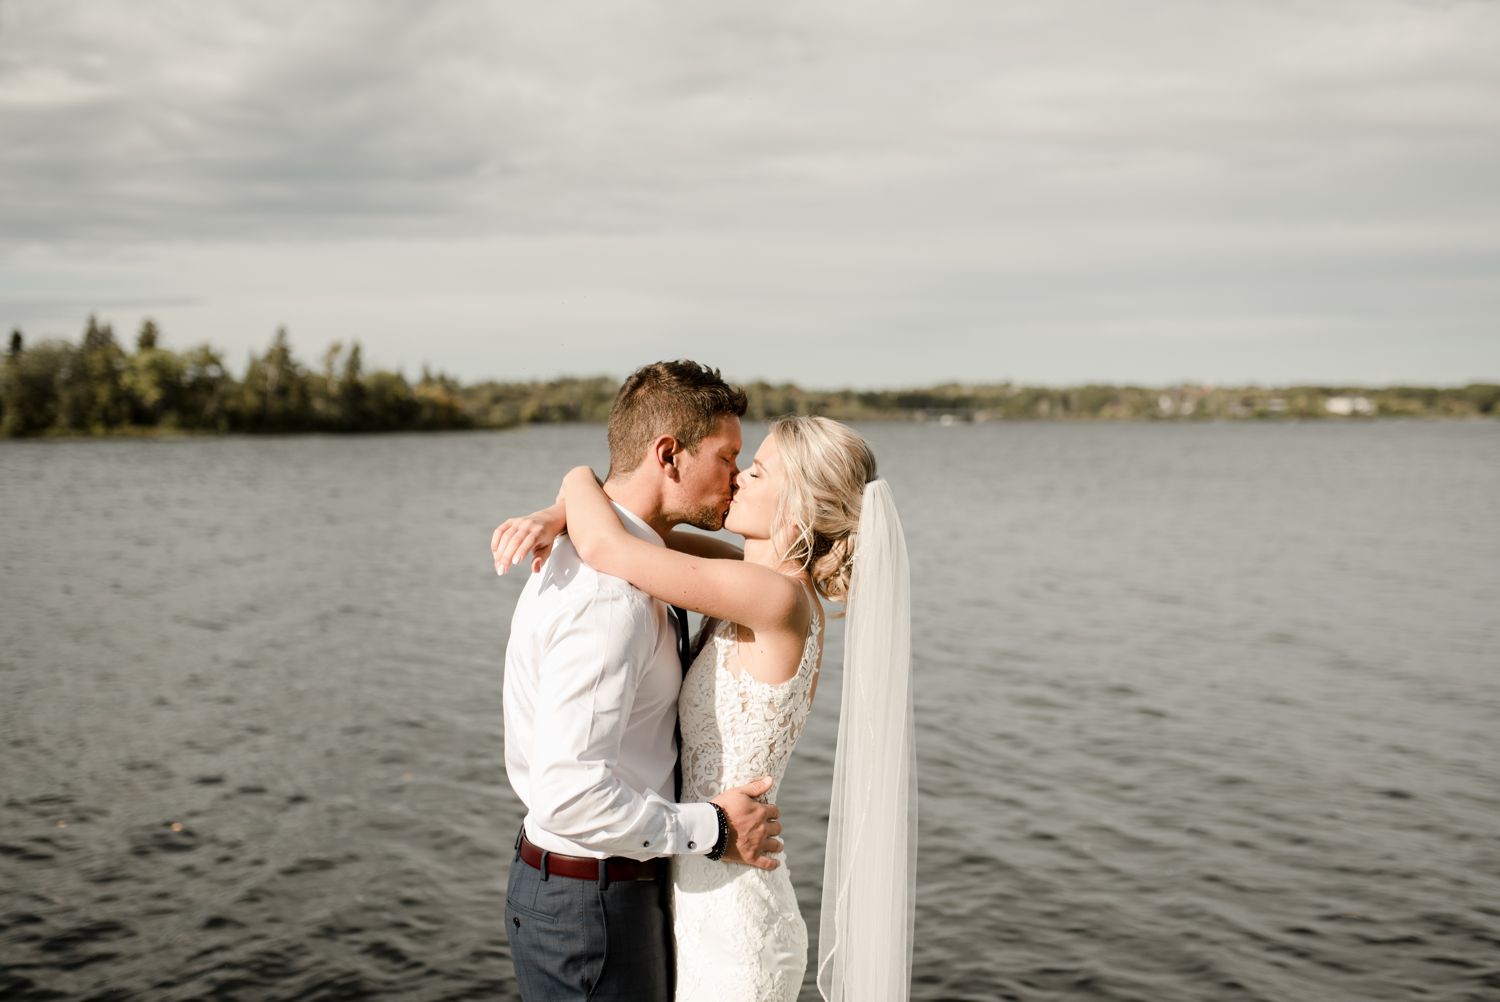 Kenora Lakeside wedding at the Clarion Inn in Ontario, photographed by Vanessa Renae Photography, a Winnipeg and Kenora wedding and elopement photographer